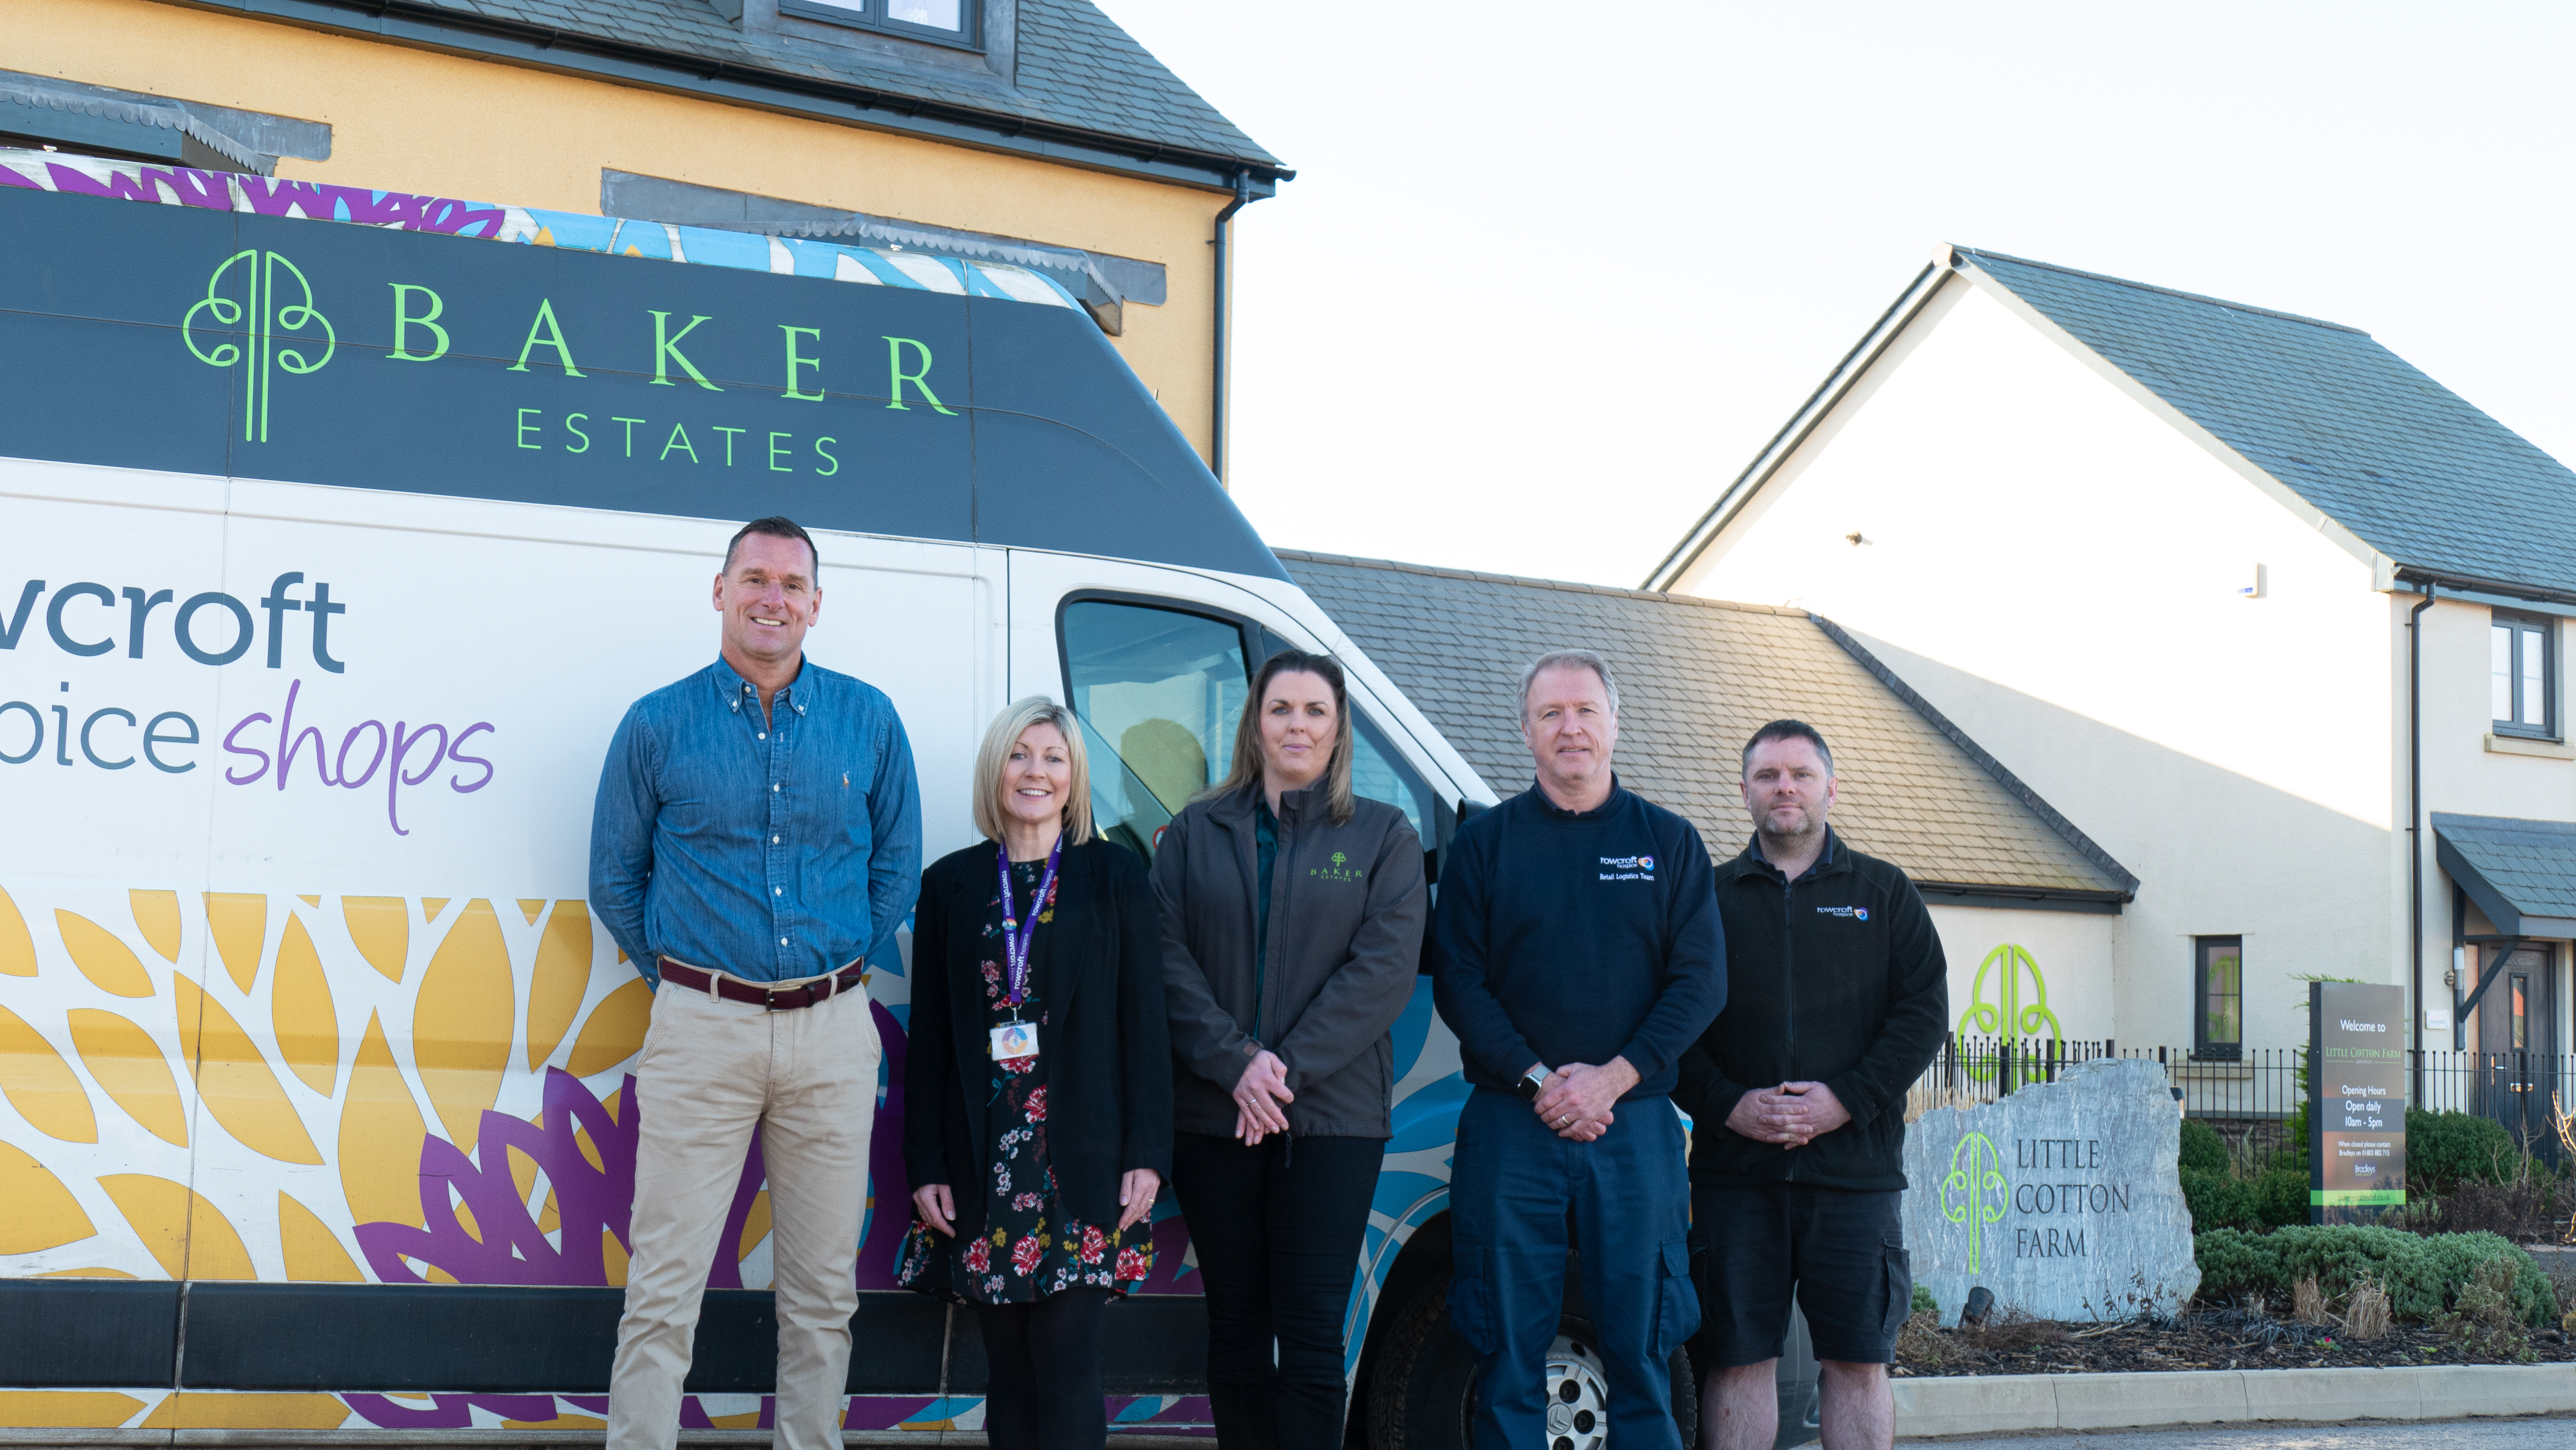 Baker Estates continues its support to Rowcroft Hospice with two-year sponsorship of £10,000 to support charity vans